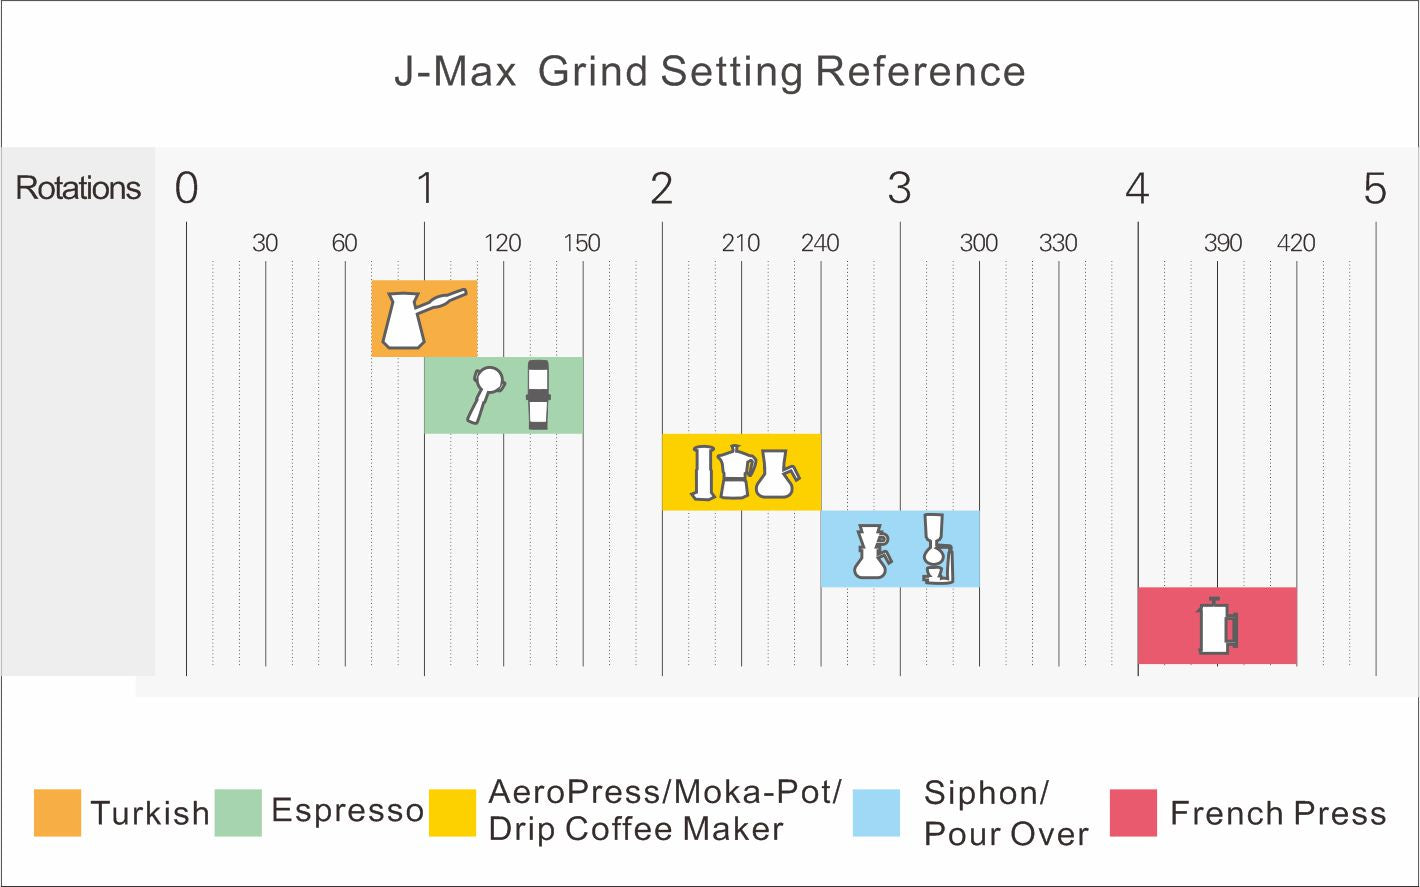 J-Max grind setting reference